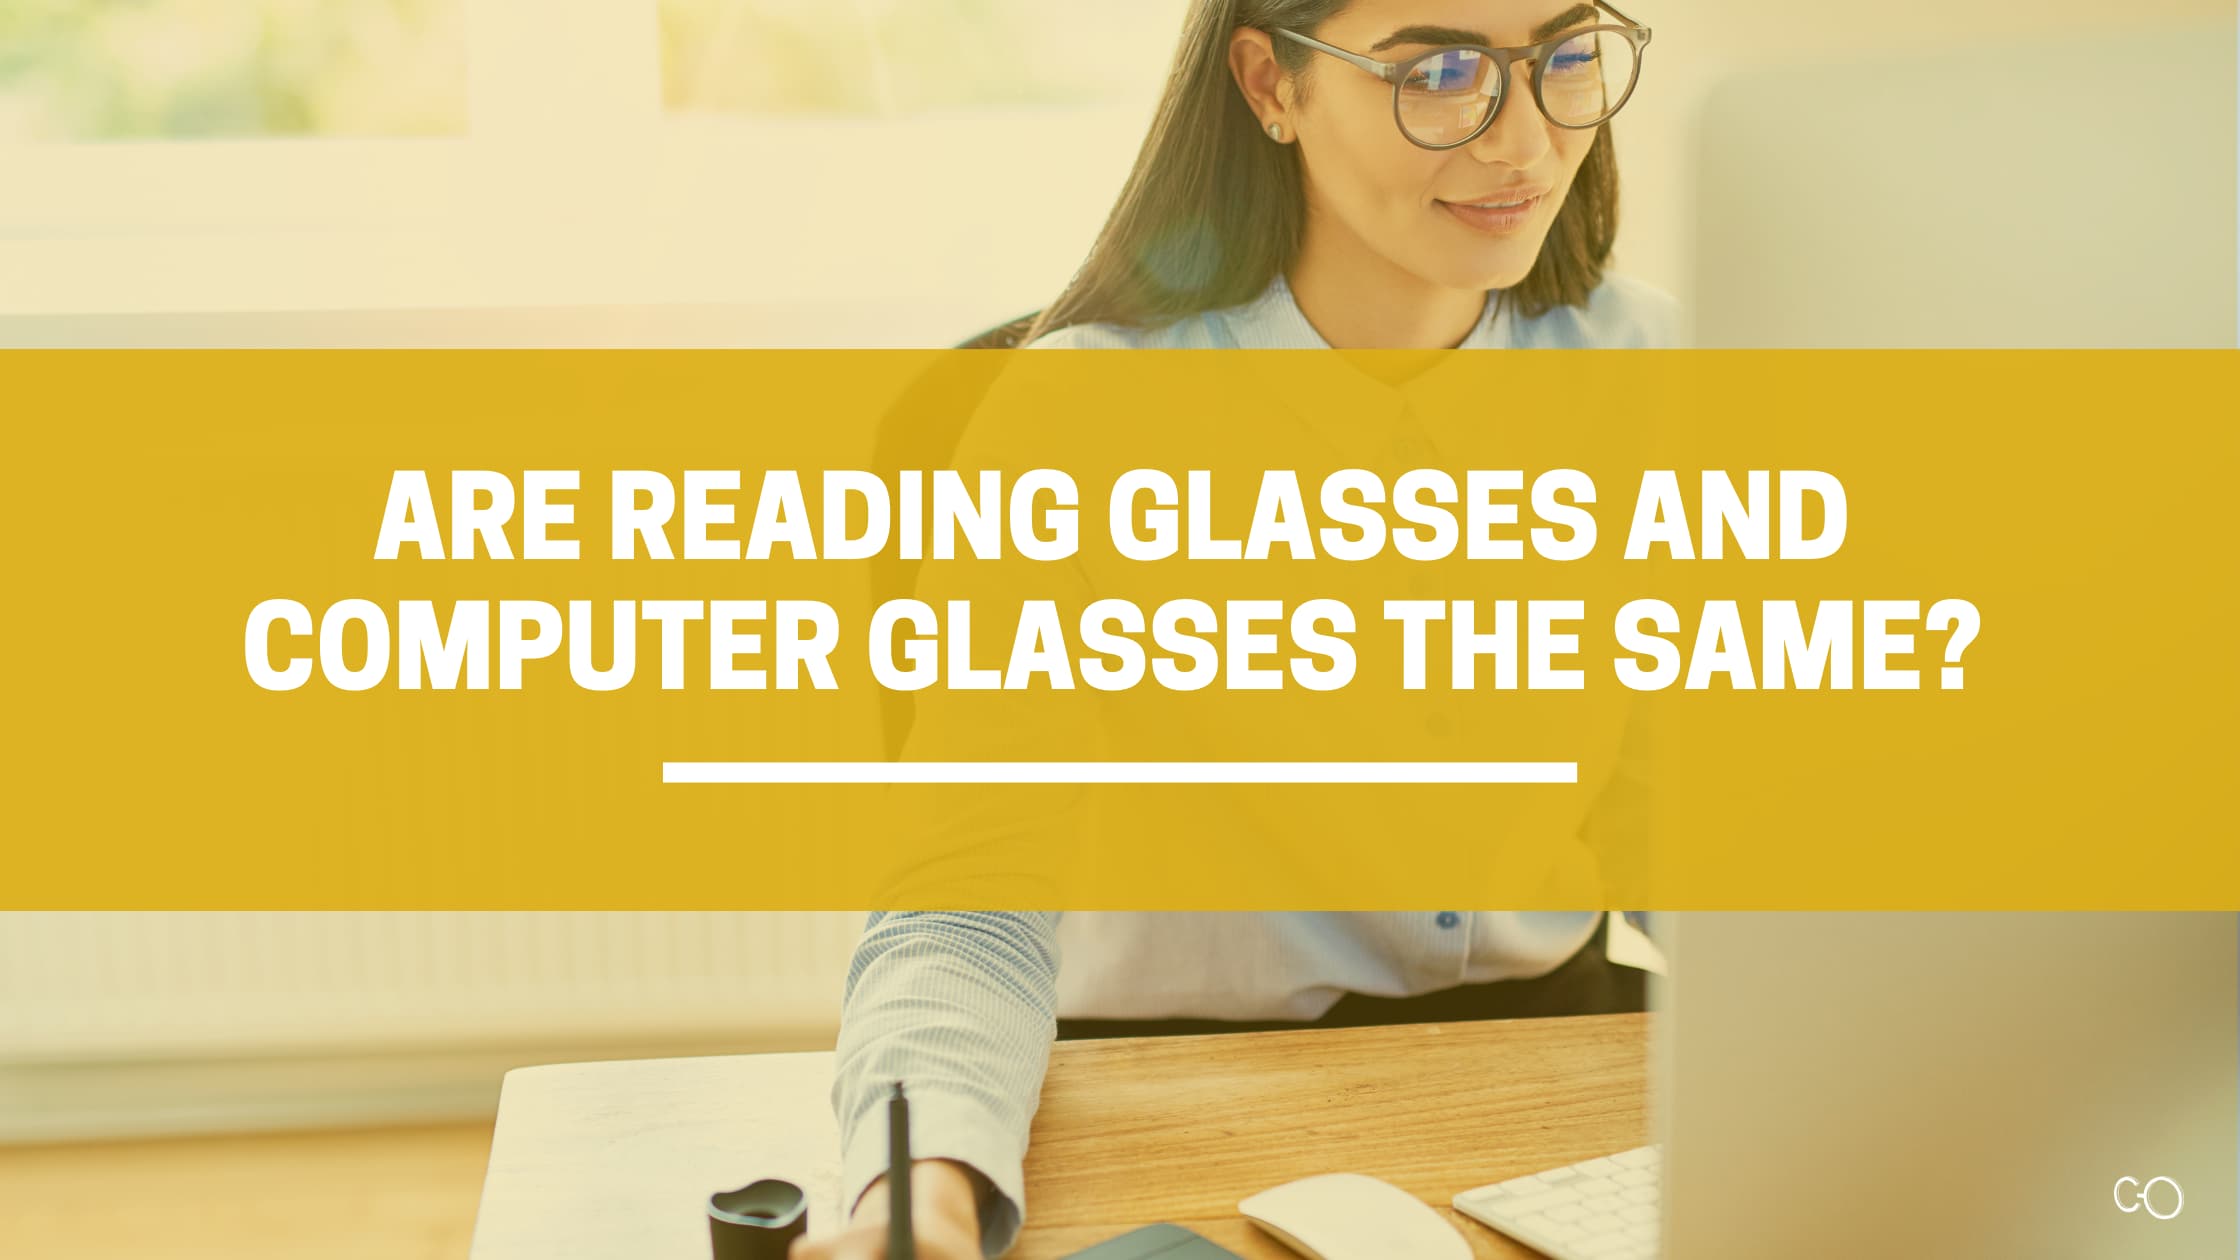 Are reading glasses and computer glasses the same